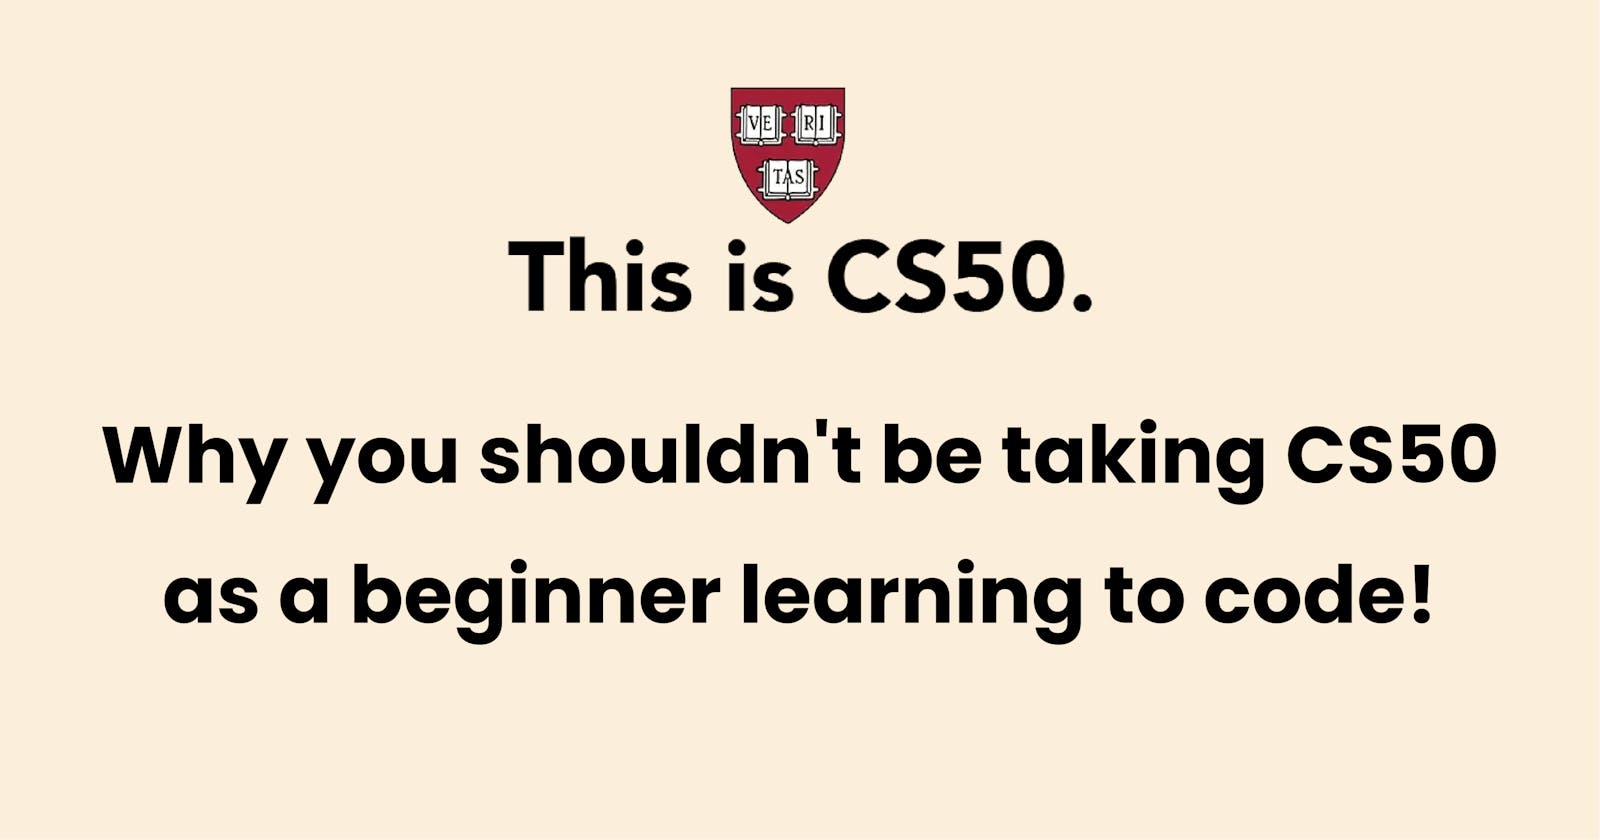 Why you shouldn't be taking CS50 as a beginner learning to code!